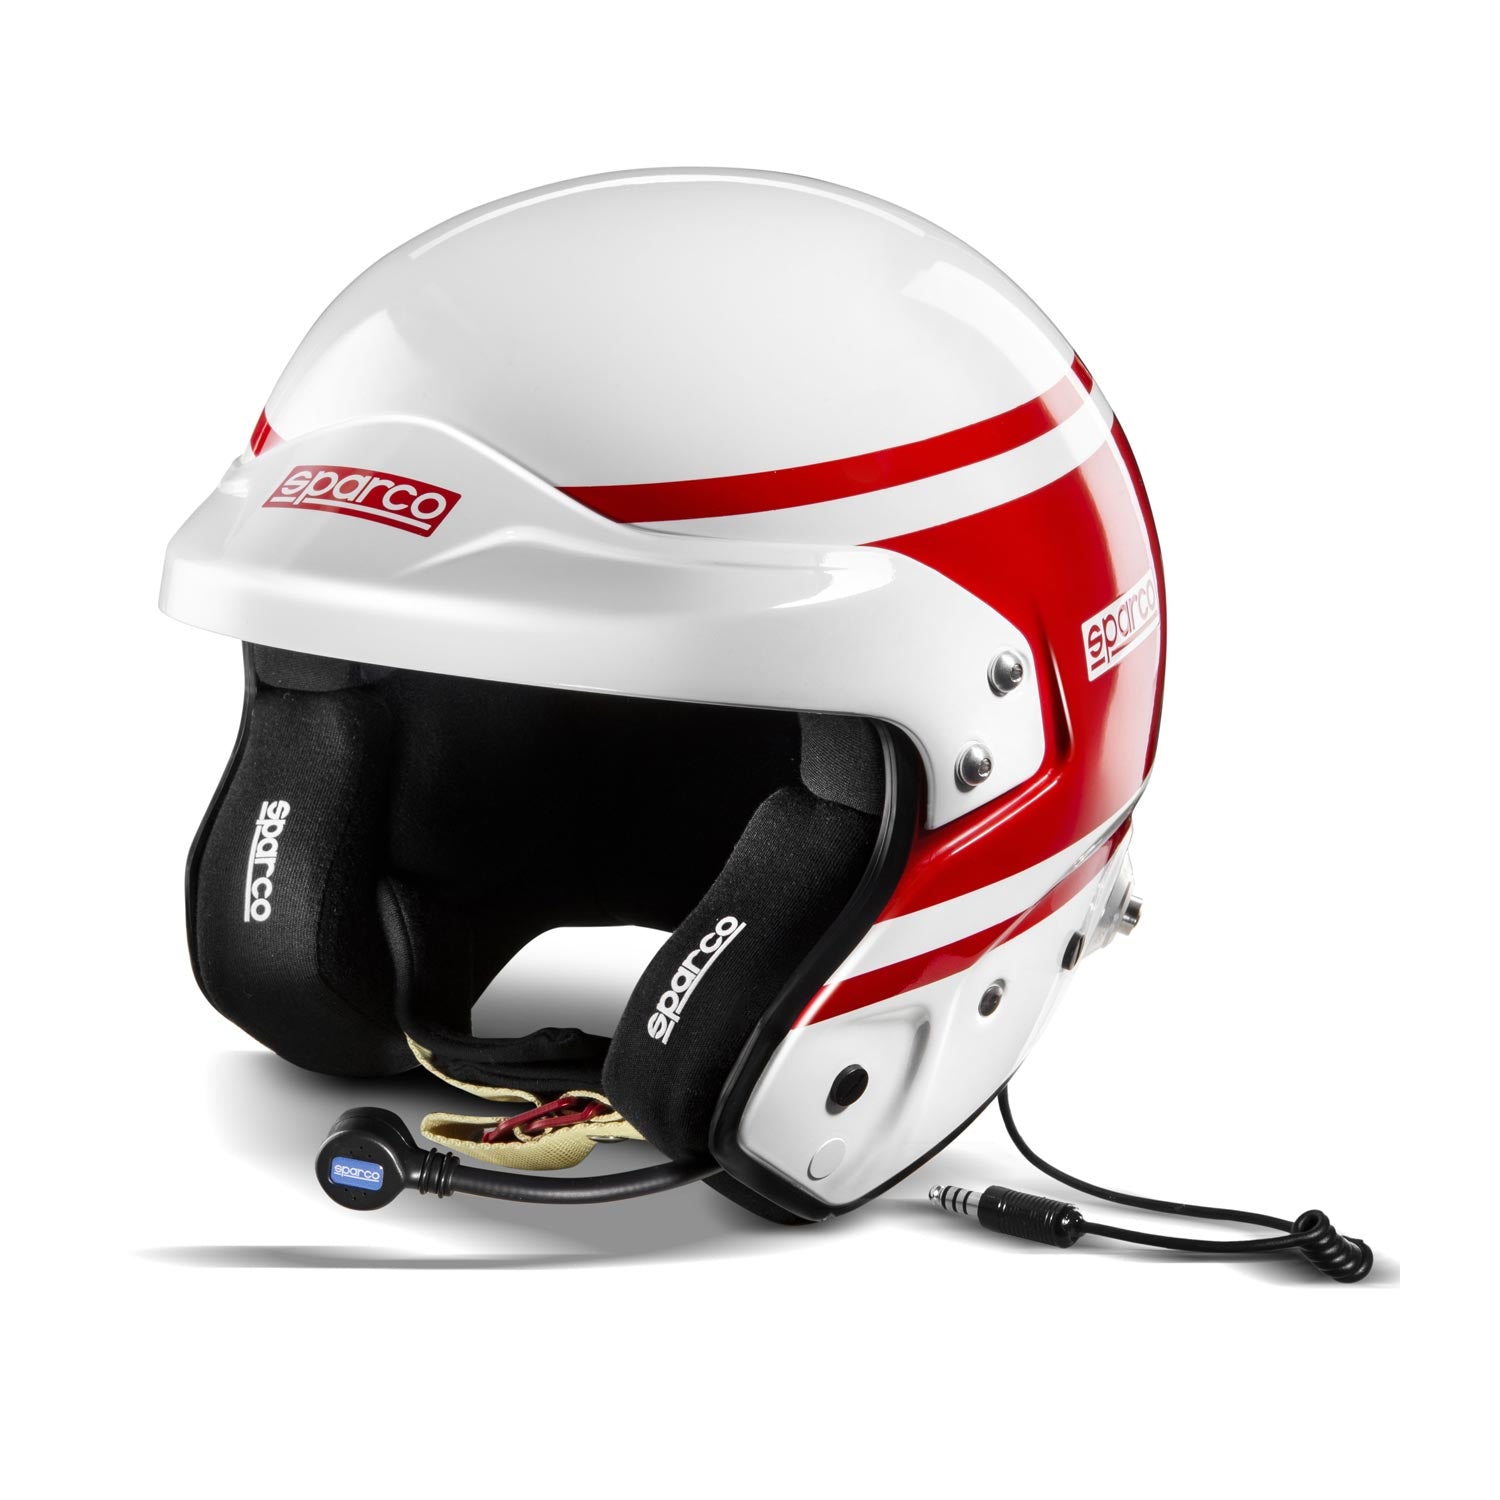 SPARCO 003369RS1S RJ-i 1977 Racing helmet open-face, FIA/SNELL SA2020, red/white, size S (55-56) Photo-0 